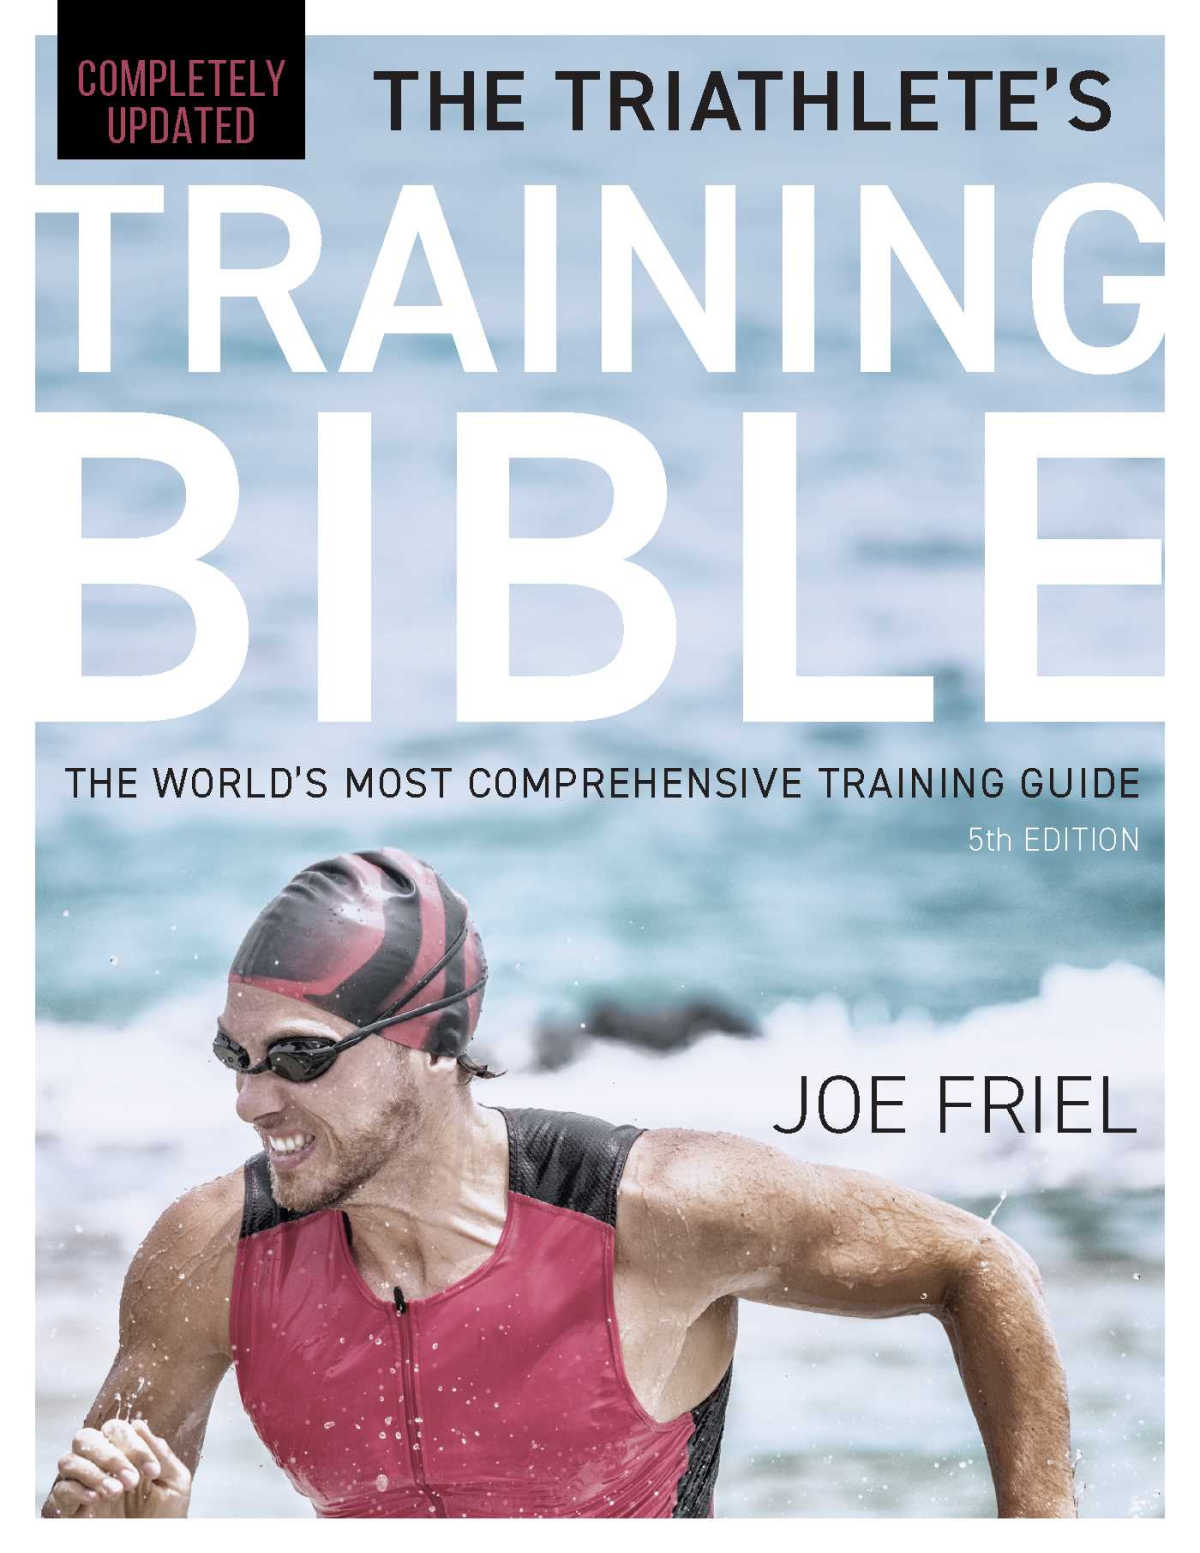 Triathletes Training Bible book cover